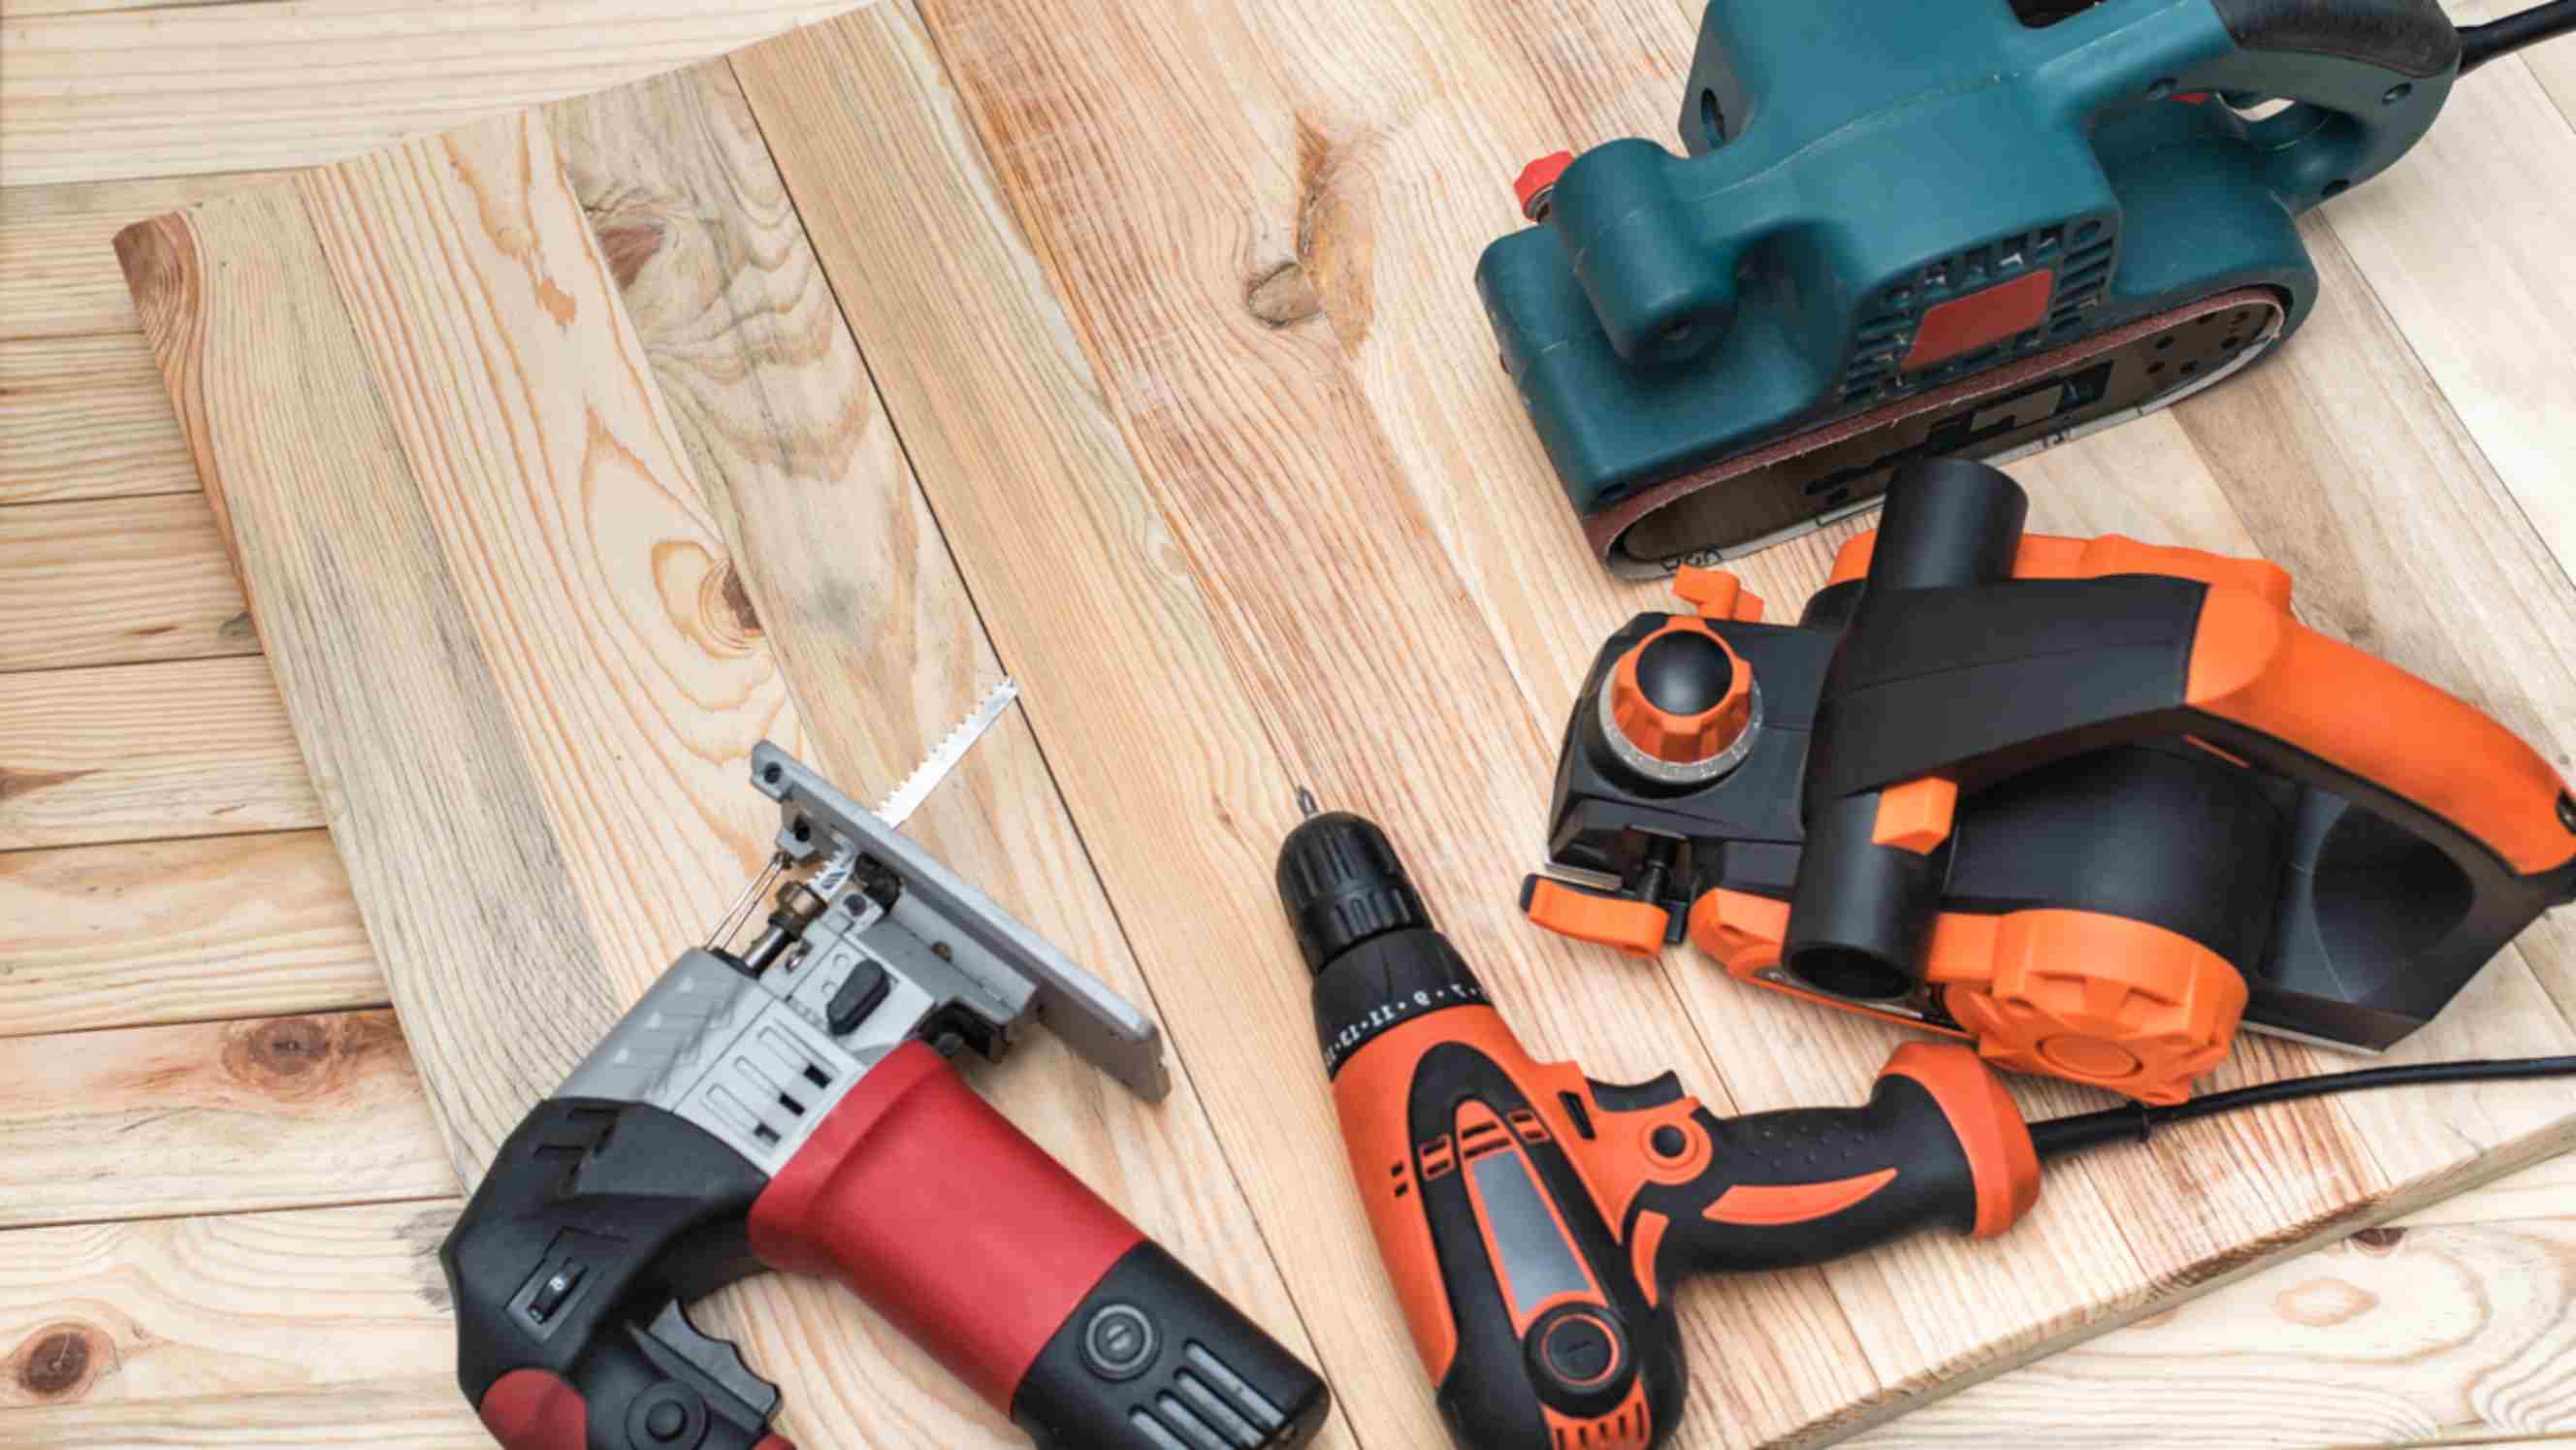 Impact driver vs. impact wrench - Set of handheld woodworking power tools on a light wooden background